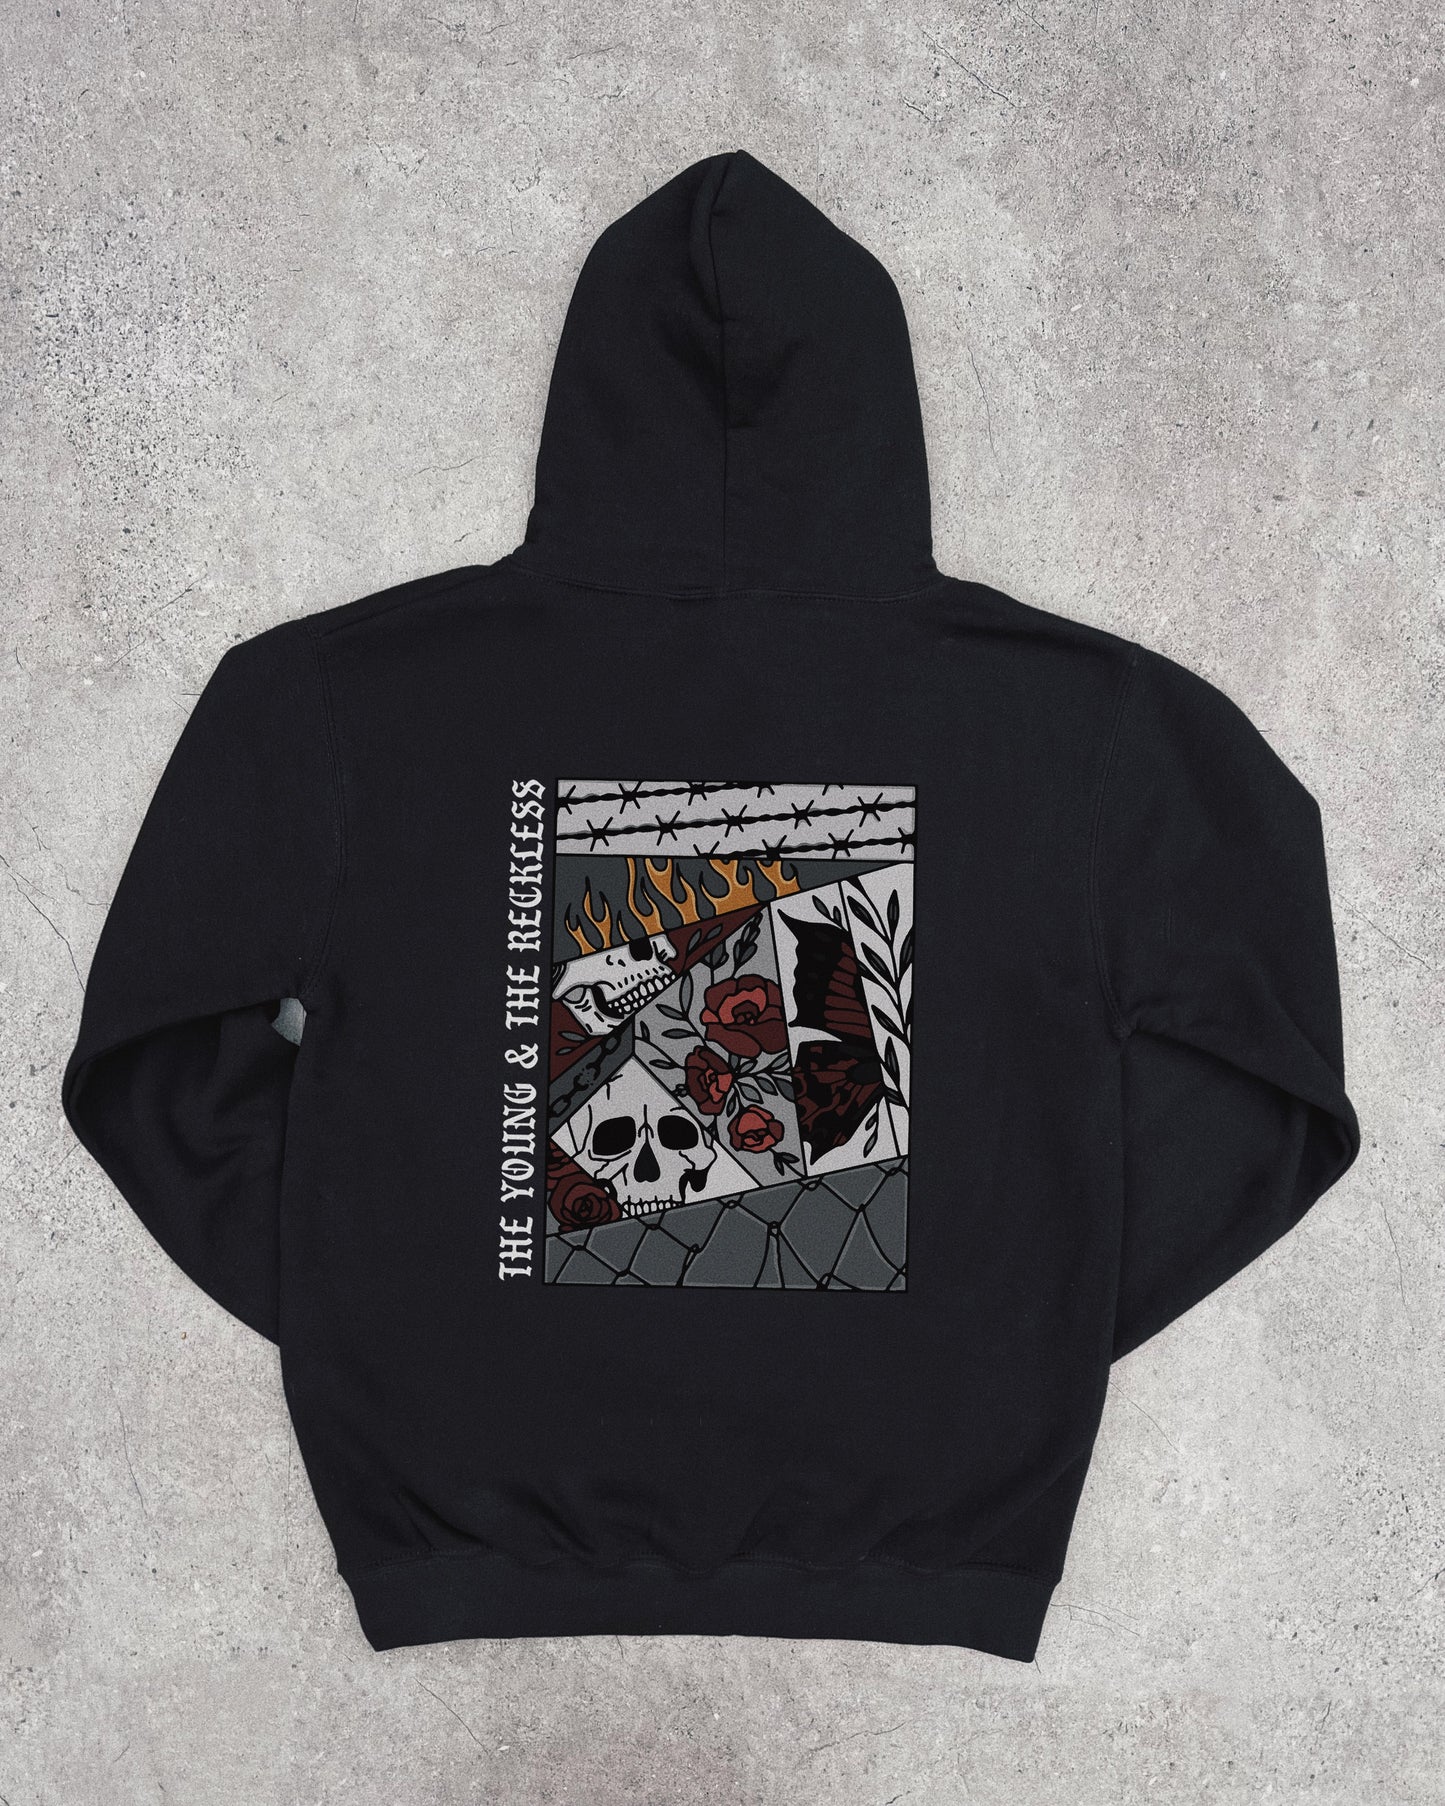 TY&TR Patchwork - Pullover Hoodie